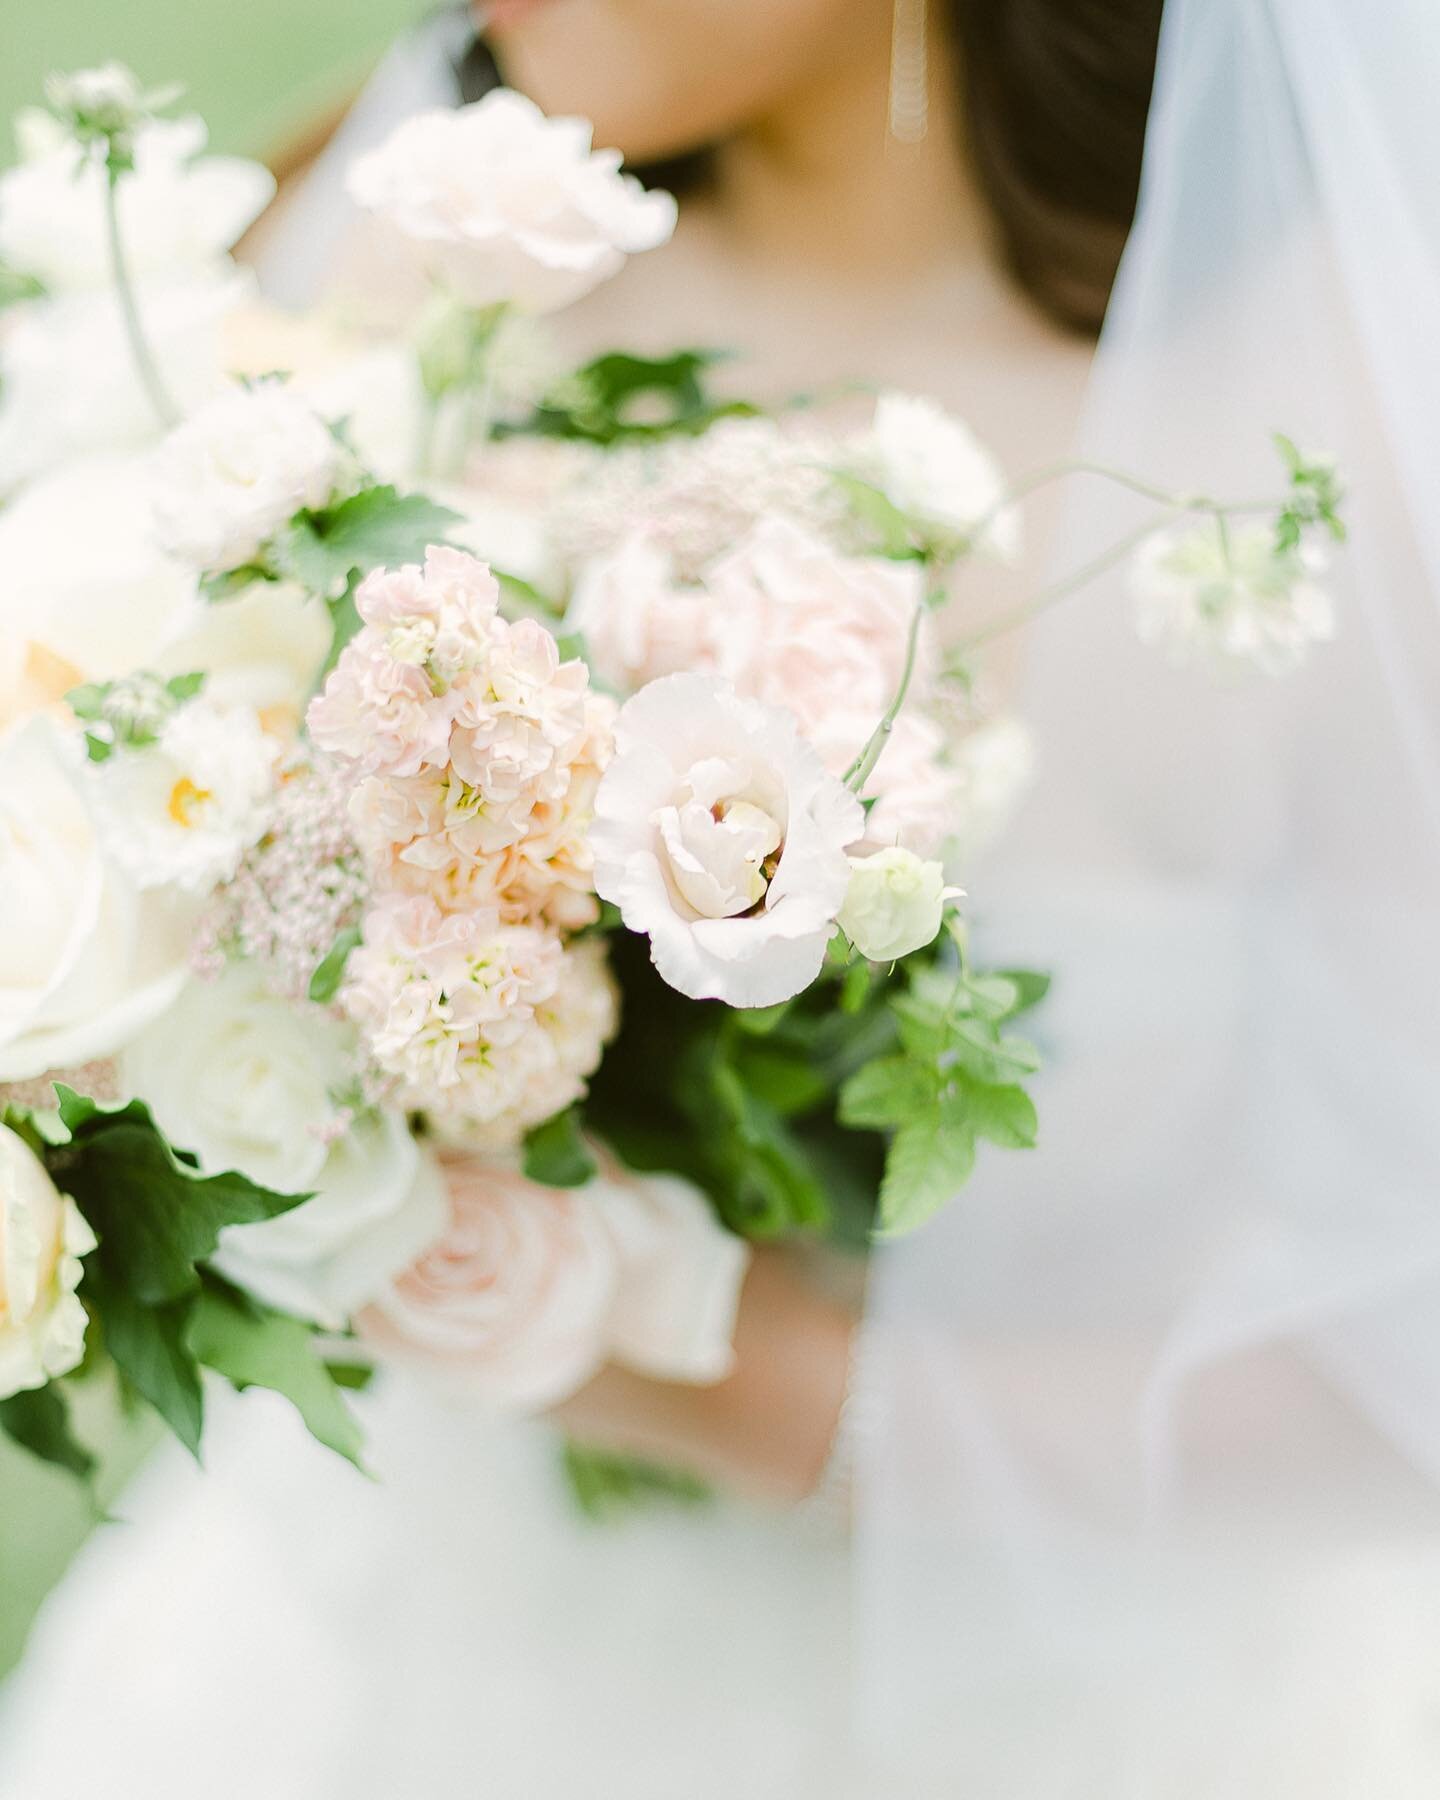 From cascading blooms to minimalist greenery, there's a bouquet for every bride's style. Let your bouquet be a reflection of your personality and make a statement on your special day. Which bouquet speaks to you?🌿